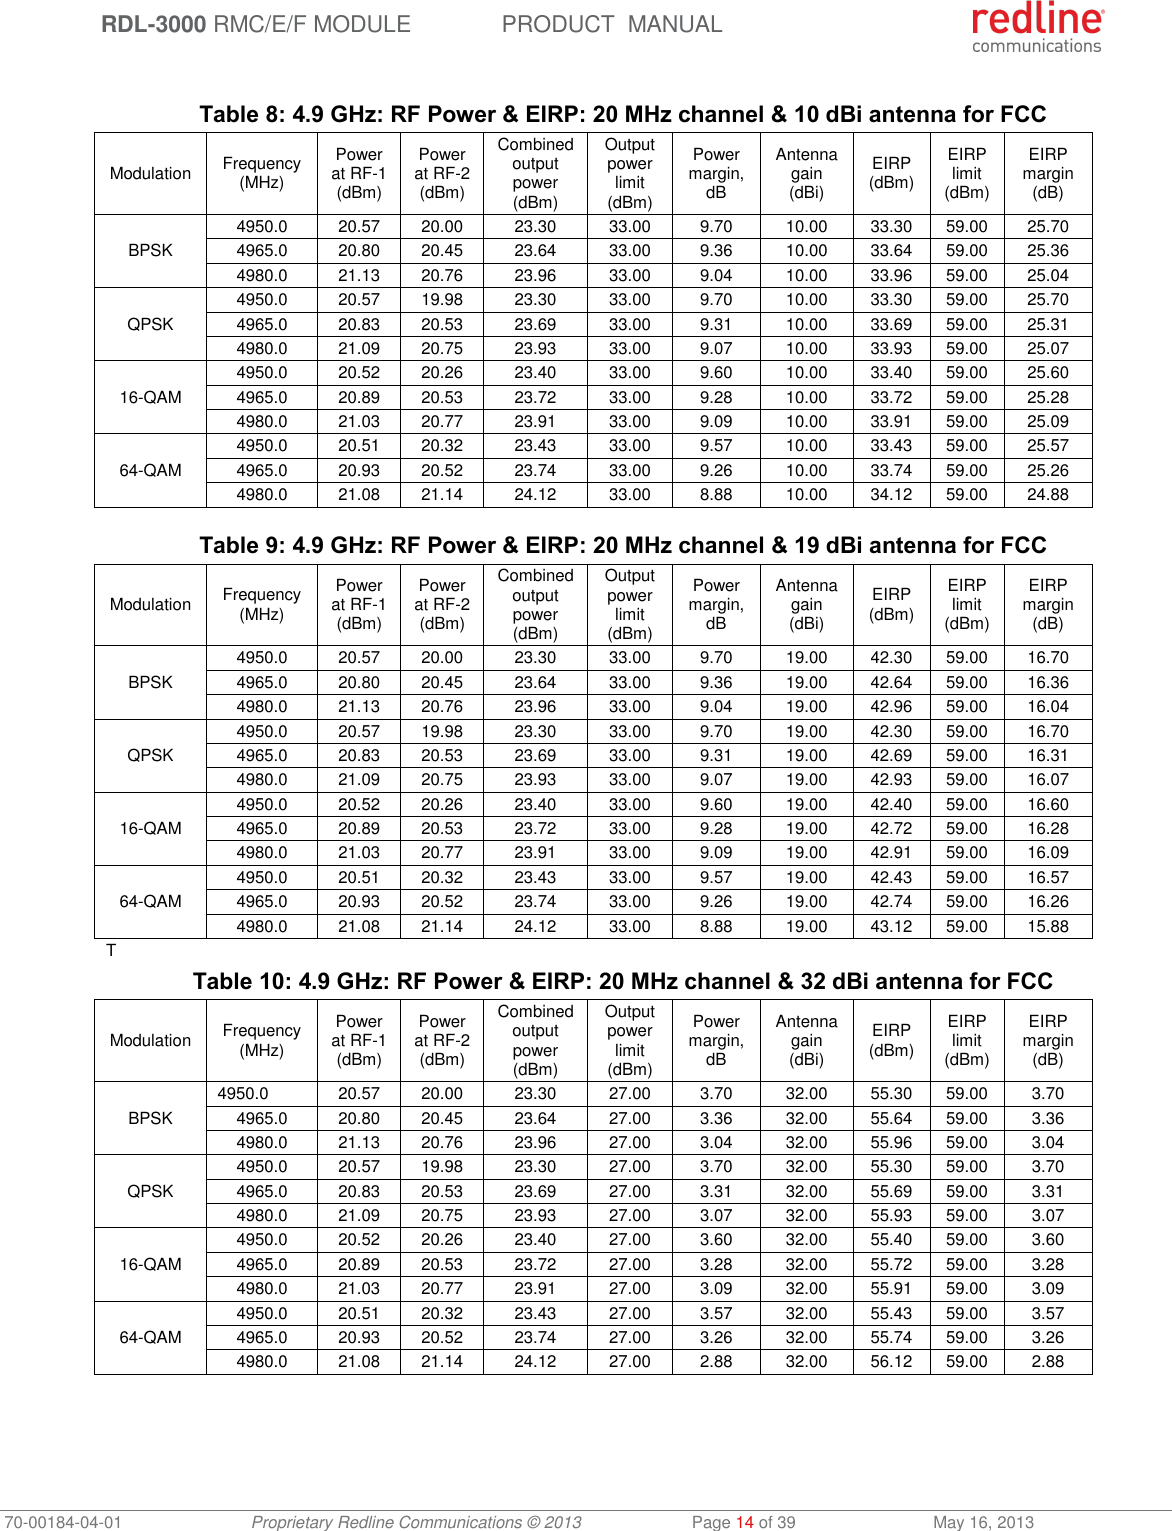  RDL-3000 RMC/E/F MODULE PRODUCT  MANUAL 70-00184-04-01 Proprietary Redline Communications © 2013  Page 14 of 39  May 16, 2013  Table 8: 4.9 GHz: RF Power &amp; EIRP: 20 MHz channel &amp; 10 dBi antenna for FCC Modulation Frequency (MHz) Power at RF-1 (dBm) Power at RF-2 (dBm) Combined output power (dBm) Output power limit (dBm) Power margin, dB Antenna gain (dBi) EIRP (dBm) EIRP limit (dBm) EIRP margin (dB) BPSK 4950.0 20.57 20.00 23.30 33.00 9.70 10.00 33.30 59.00 25.70 4965.0 20.80 20.45 23.64 33.00 9.36 10.00 33.64 59.00 25.36 4980.0 21.13 20.76 23.96 33.00 9.04 10.00 33.96 59.00 25.04 QPSK 4950.0 20.57 19.98 23.30 33.00 9.70 10.00 33.30 59.00 25.70 4965.0 20.83 20.53 23.69 33.00 9.31 10.00 33.69 59.00 25.31 4980.0 21.09 20.75 23.93 33.00 9.07 10.00 33.93 59.00 25.07 16-QAM 4950.0 20.52 20.26 23.40 33.00 9.60 10.00 33.40 59.00 25.60 4965.0 20.89 20.53 23.72 33.00 9.28 10.00 33.72 59.00 25.28 4980.0 21.03 20.77 23.91 33.00 9.09 10.00 33.91 59.00 25.09 64-QAM 4950.0 20.51 20.32 23.43 33.00 9.57 10.00 33.43 59.00 25.57 4965.0 20.93 20.52 23.74 33.00 9.26 10.00 33.74 59.00 25.26 4980.0 21.08 21.14 24.12 33.00 8.88 10.00 34.12 59.00 24.88  Table 9: 4.9 GHz: RF Power &amp; EIRP: 20 MHz channel &amp; 19 dBi antenna for FCC Modulation Frequency (MHz) Power at RF-1 (dBm) Power at RF-2 (dBm) Combined output power (dBm) Output power limit (dBm) Power margin, dB Antenna gain (dBi) EIRP (dBm) EIRP limit (dBm) EIRP margin (dB) BPSK 4950.0 20.57 20.00 23.30 33.00 9.70 19.00 42.30 59.00 16.70 4965.0 20.80 20.45 23.64 33.00 9.36 19.00 42.64 59.00 16.36 4980.0 21.13 20.76 23.96 33.00 9.04 19.00 42.96 59.00 16.04 QPSK 4950.0 20.57 19.98 23.30 33.00 9.70 19.00 42.30 59.00 16.70 4965.0 20.83 20.53 23.69 33.00 9.31 19.00 42.69 59.00 16.31 4980.0 21.09 20.75 23.93 33.00 9.07 19.00 42.93 59.00 16.07 16-QAM 4950.0 20.52 20.26 23.40 33.00 9.60 19.00 42.40 59.00 16.60 4965.0 20.89 20.53 23.72 33.00 9.28 19.00 42.72 59.00 16.28 4980.0 21.03 20.77 23.91 33.00 9.09 19.00 42.91 59.00 16.09 64-QAM 4950.0 20.51 20.32 23.43 33.00 9.57 19.00 42.43 59.00 16.57 4965.0 20.93 20.52 23.74 33.00 9.26 19.00 42.74 59.00 16.26 4980.0 21.08 21.14 24.12 33.00 8.88 19.00 43.12 59.00 15.88 T  Table 10: 4.9 GHz: RF Power &amp; EIRP: 20 MHz channel &amp; 32 dBi antenna for FCC Modulation Frequency (MHz) Power at RF-1 (dBm) Power at RF-2 (dBm) Combined output power (dBm) Output power limit (dBm) Power margin, dB Antenna gain (dBi) EIRP (dBm) EIRP limit (dBm) EIRP margin (dB) BPSK 4950.0 20.57 20.00 23.30 27.00 3.70 32.00 55.30 59.00 3.70 4965.0 20.80 20.45 23.64 27.00 3.36 32.00 55.64 59.00 3.36 4980.0 21.13 20.76 23.96 27.00 3.04 32.00 55.96 59.00 3.04 QPSK 4950.0 20.57 19.98 23.30 27.00 3.70 32.00 55.30 59.00 3.70 4965.0 20.83 20.53 23.69 27.00 3.31 32.00 55.69 59.00 3.31 4980.0 21.09 20.75 23.93 27.00 3.07 32.00 55.93 59.00 3.07 16-QAM 4950.0 20.52 20.26 23.40 27.00 3.60 32.00 55.40 59.00 3.60 4965.0 20.89 20.53 23.72 27.00 3.28 32.00 55.72 59.00 3.28 4980.0 21.03 20.77 23.91 27.00 3.09 32.00 55.91 59.00 3.09 64-QAM 4950.0 20.51 20.32 23.43 27.00 3.57 32.00 55.43 59.00 3.57 4965.0 20.93 20.52 23.74 27.00 3.26 32.00 55.74 59.00 3.26 4980.0 21.08 21.14 24.12 27.00 2.88 32.00 56.12 59.00 2.88  